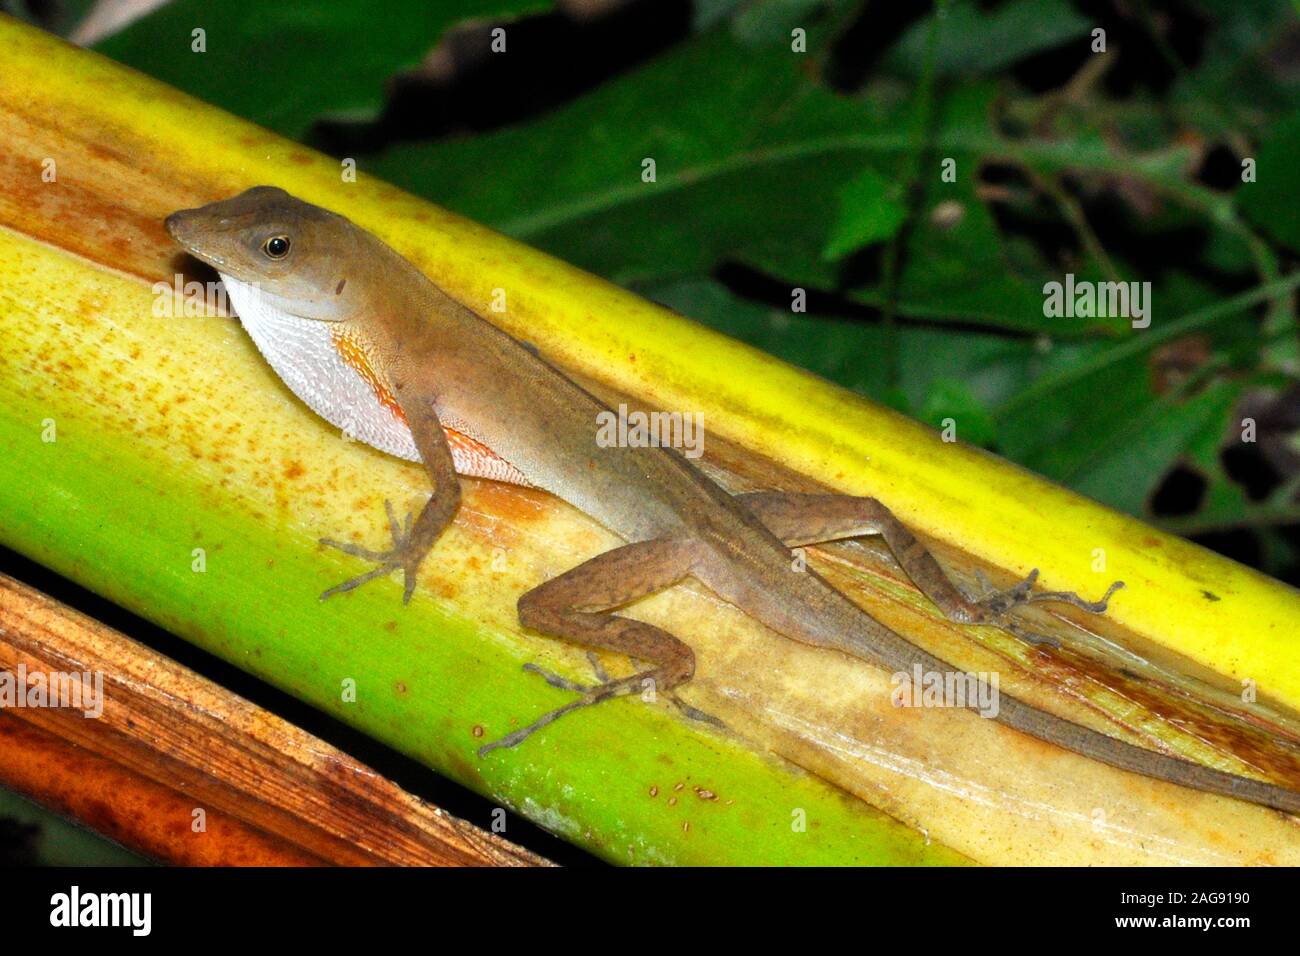 Slender anole, norops limifrons, Costa Rica. Stock Photo